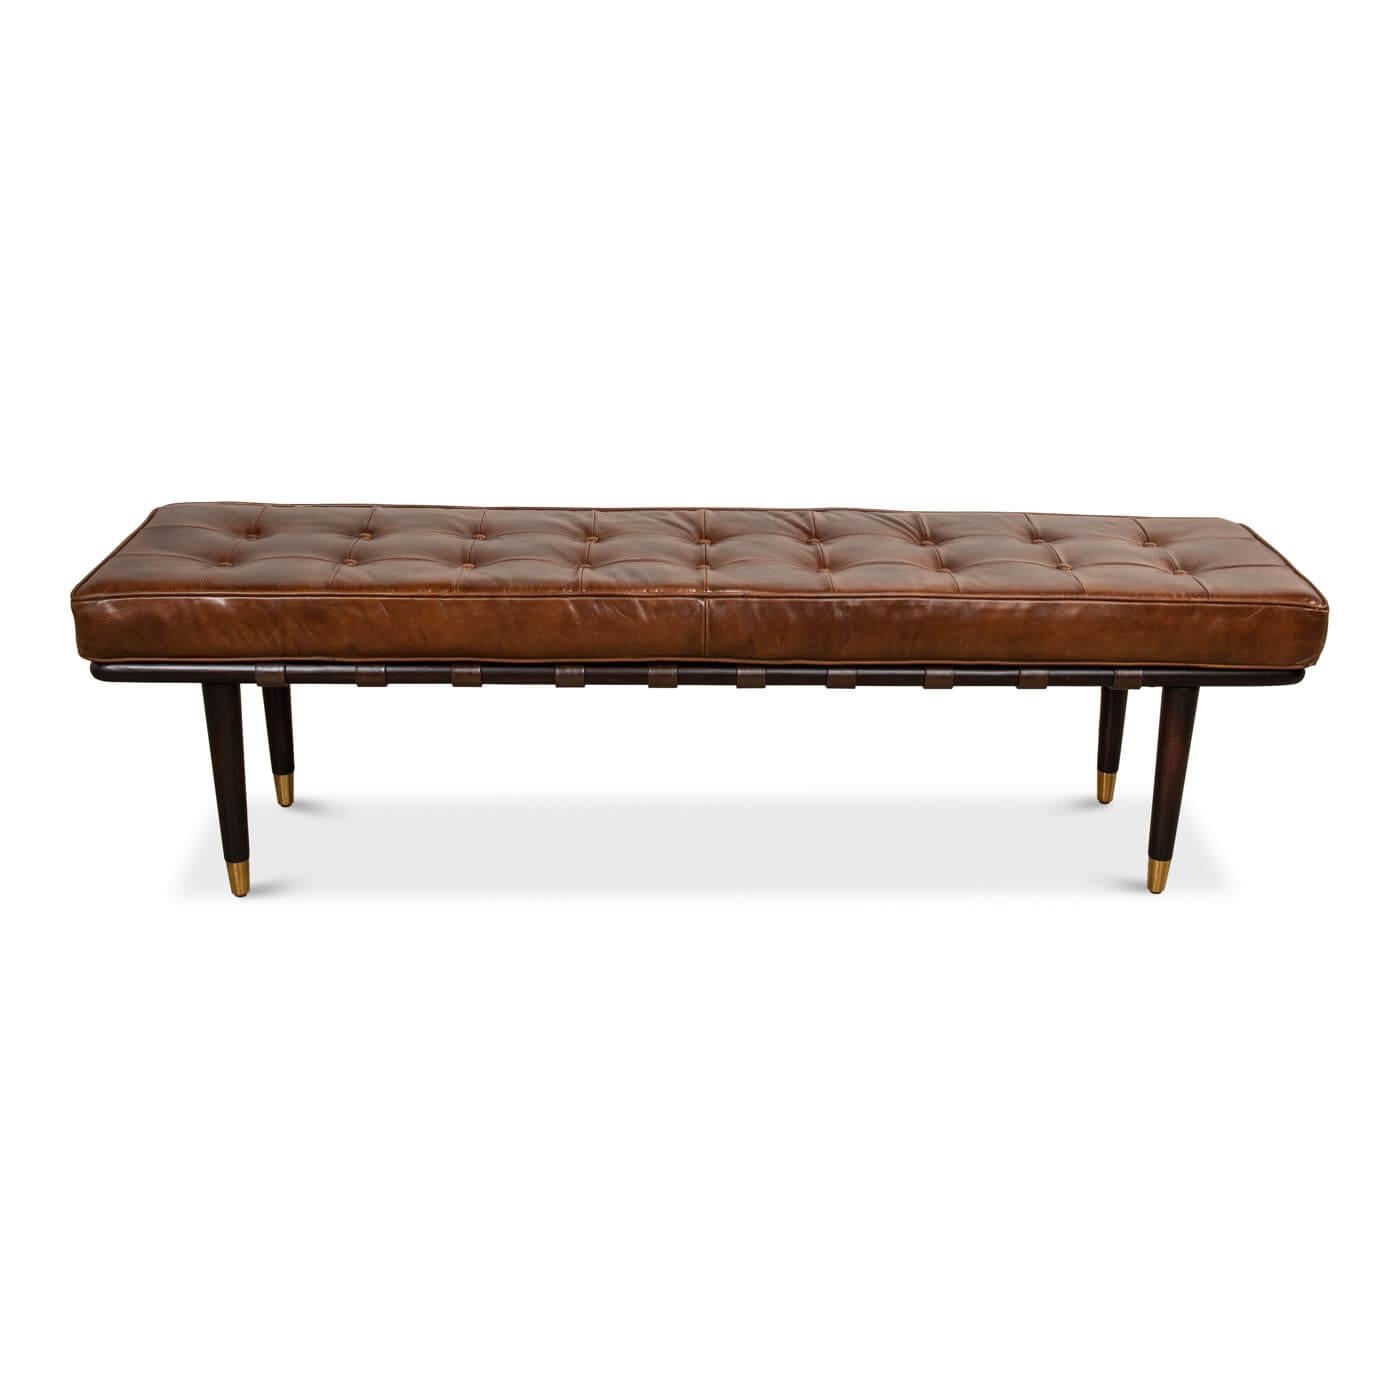 A Mid-Century Modern style tufted leather top bench. This boxed cushion benchtop is crafted in top grain leather in rich brown color with button tufting. It sits on four slender dark brown brass-capped wood legs. 

Dimensions: 64